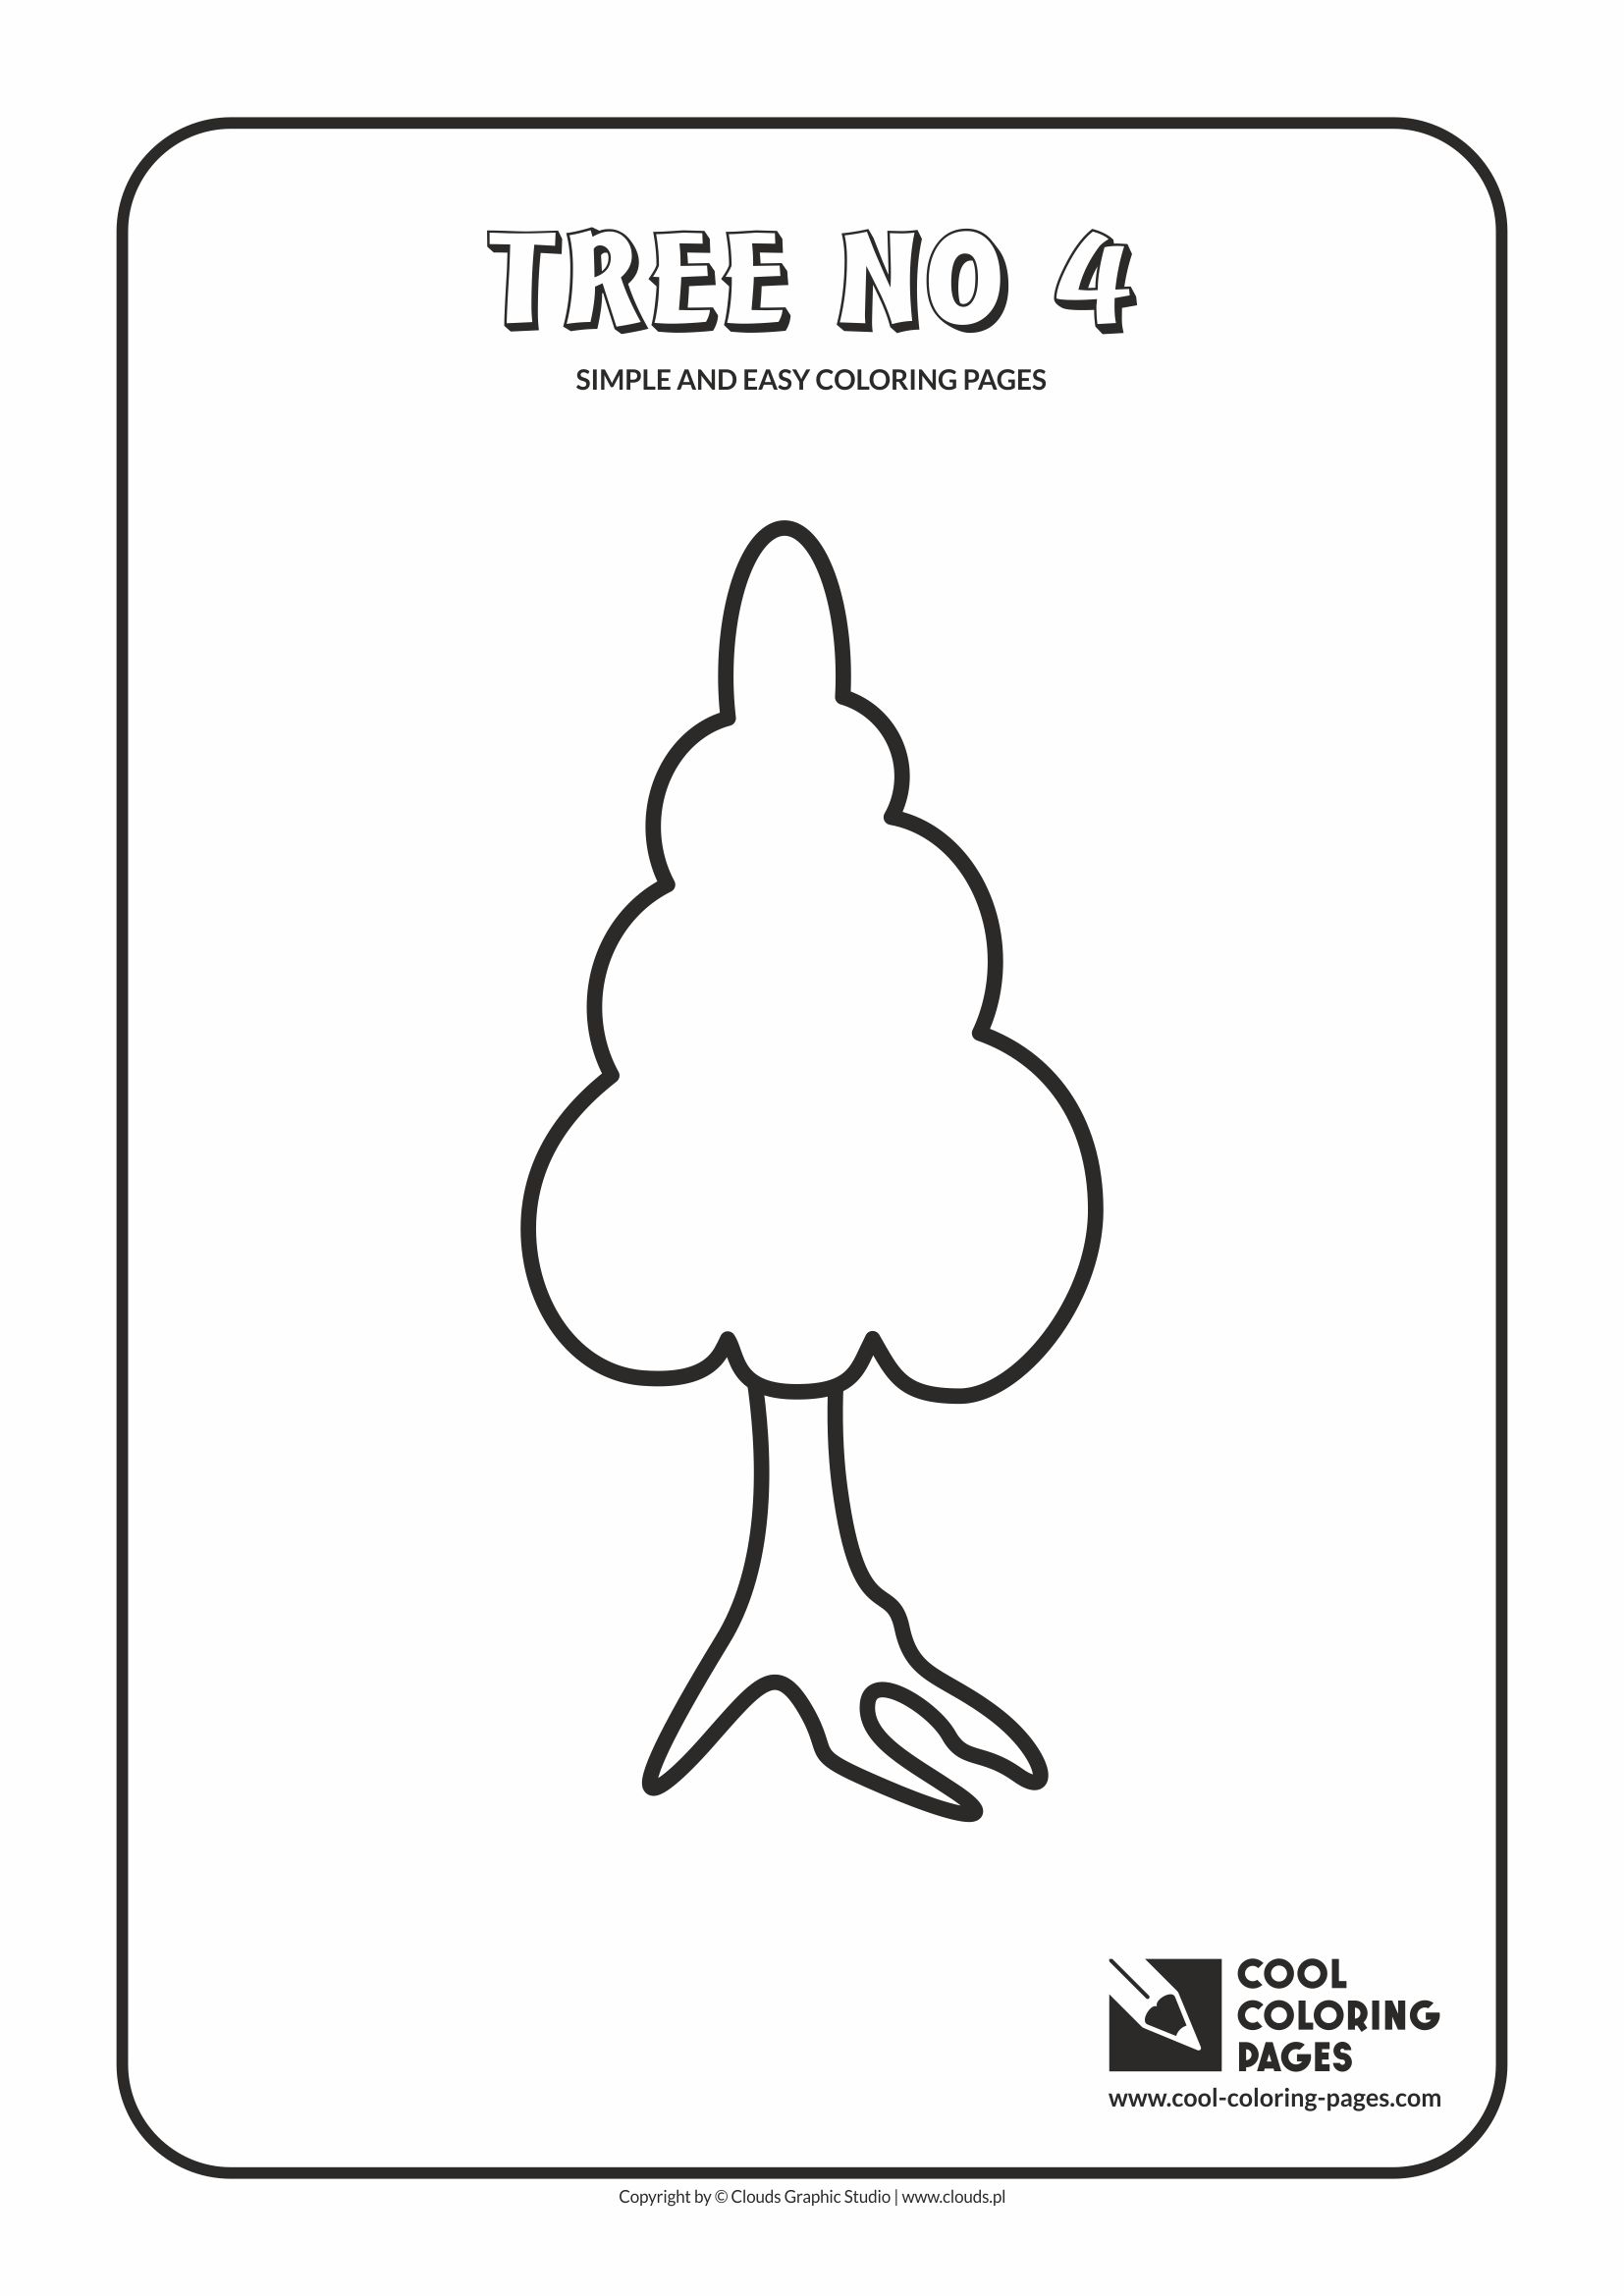 Simple and easy coloring pages for toddlers - Tree no 4